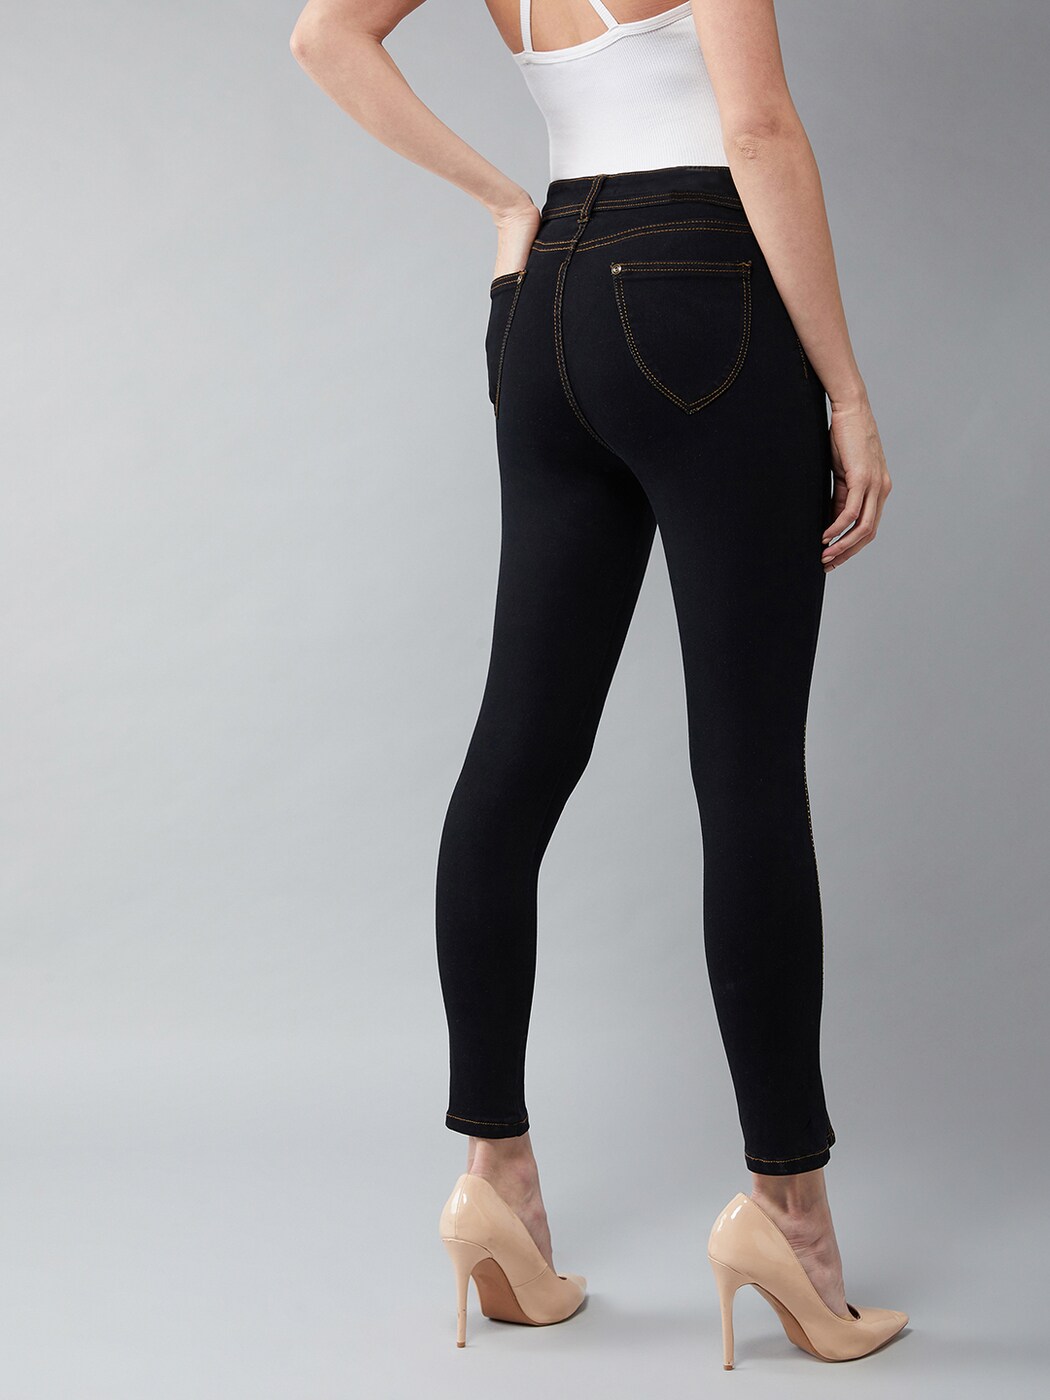 black jeans with slits